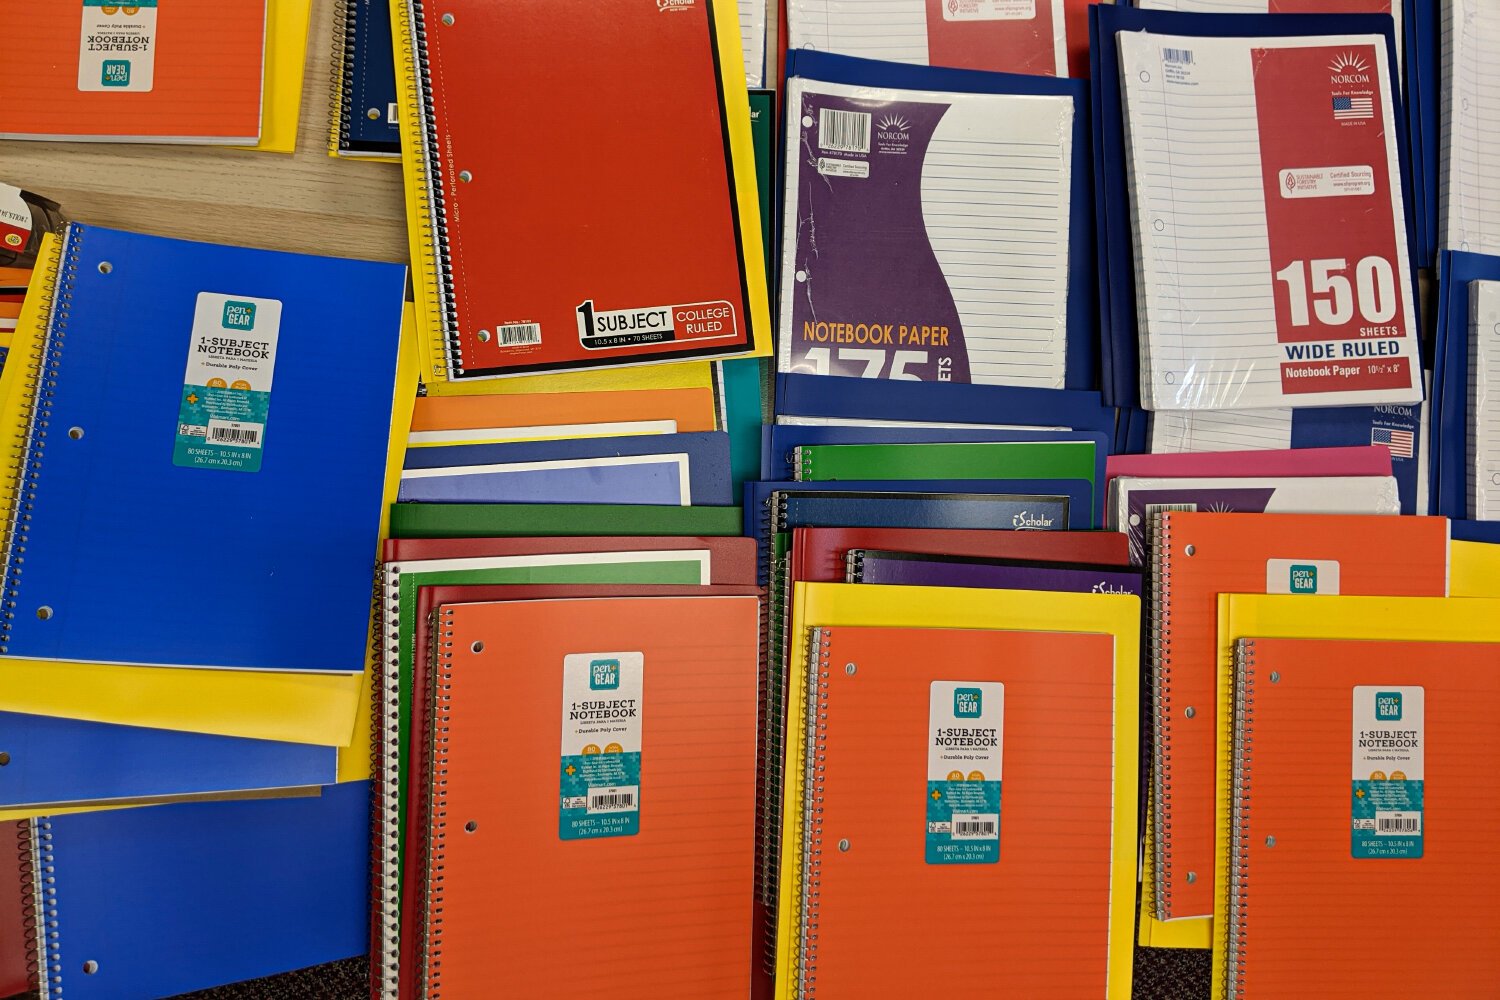 In the middel of the room sits a table covered with colorful college-ruled notebooks.